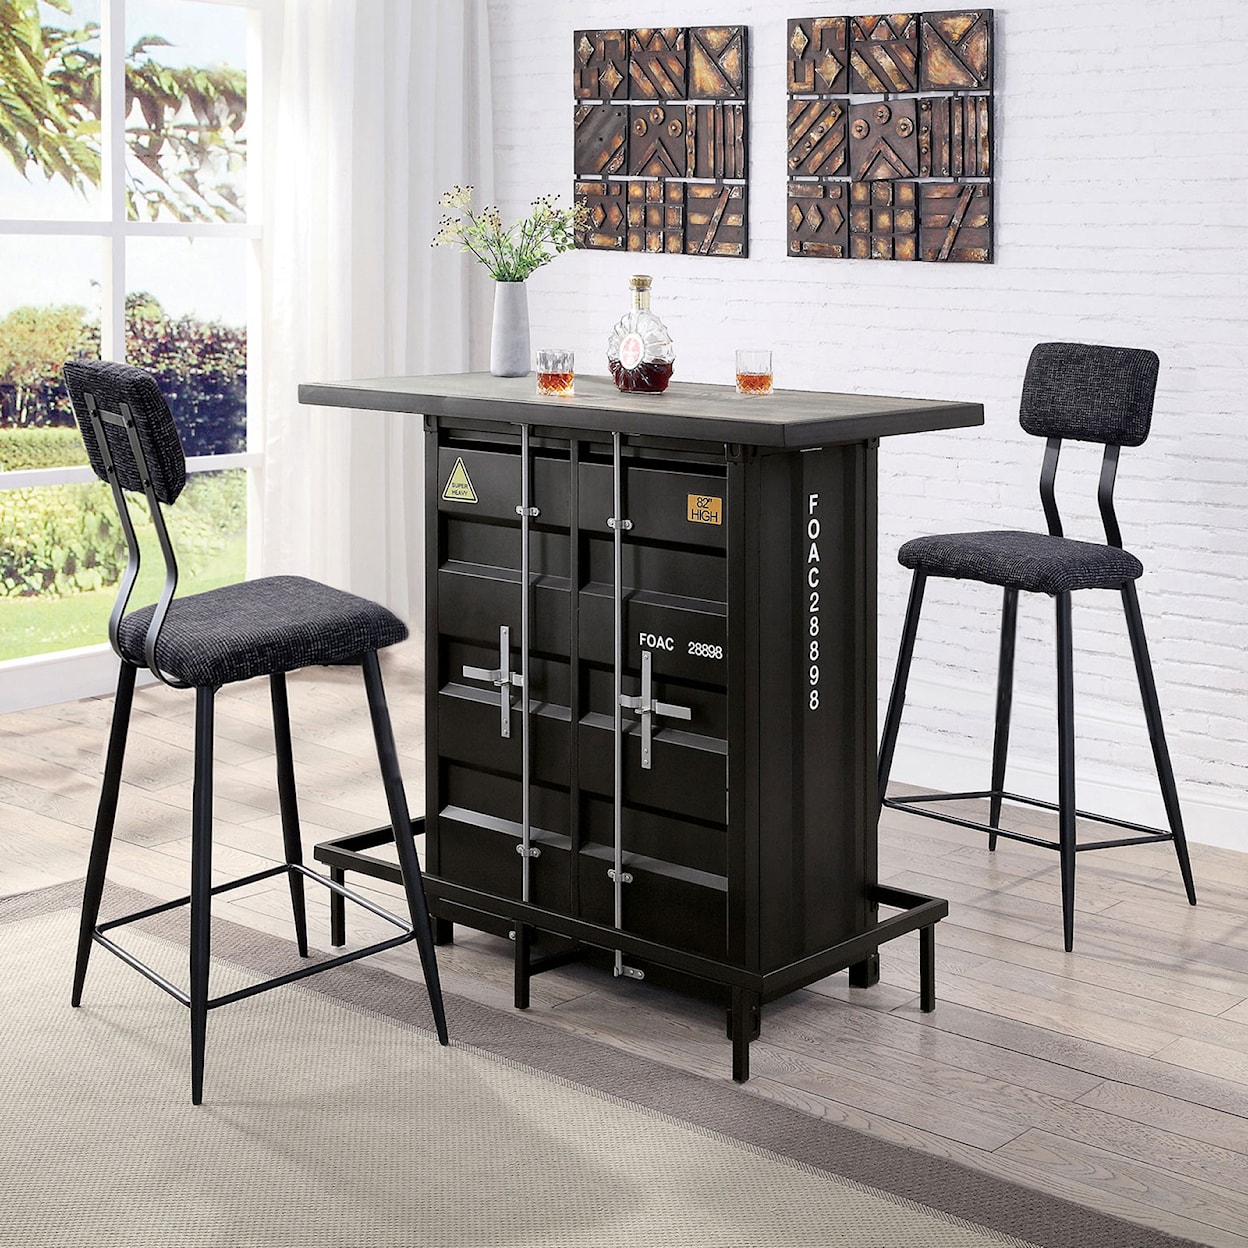 Furniture of America Esdargo Bar Height Table